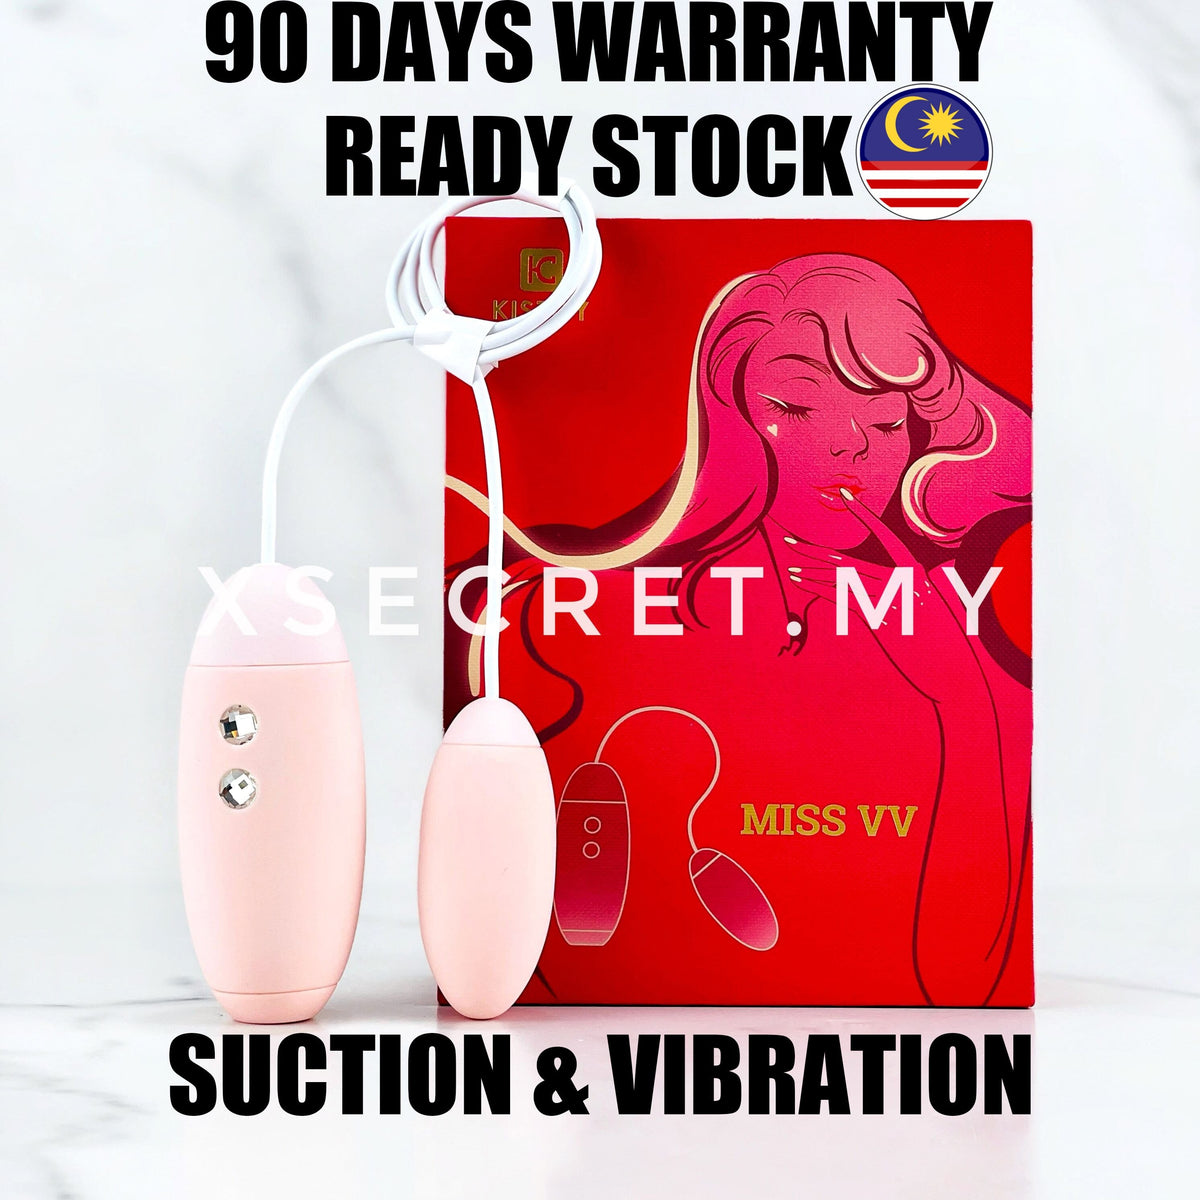 Kiss Toy Miss VV Wireless Vibrating Egg with Sucking features Remote Control Vibrating Egg Powerful Multi-Speed Vibrations Silent G- Spot Vibrator